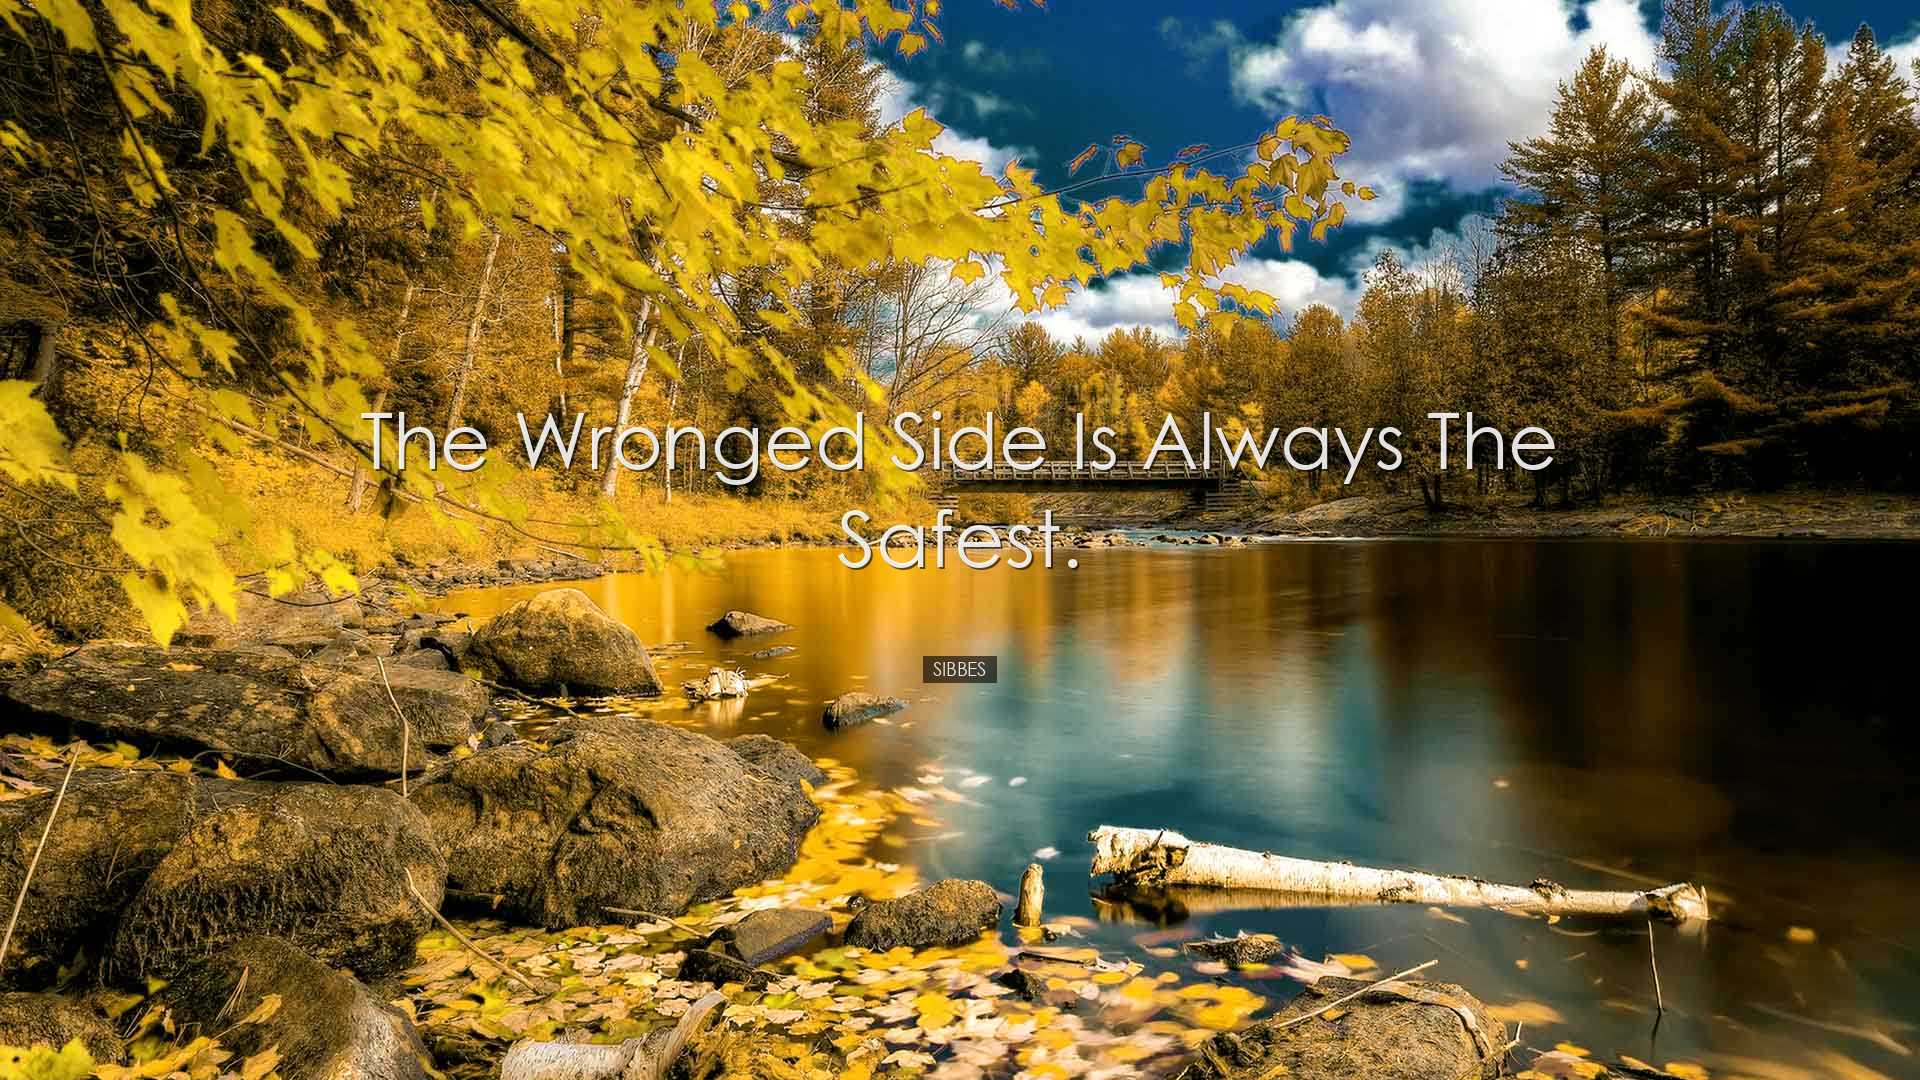 The wronged side is always the safest. - Sibbes